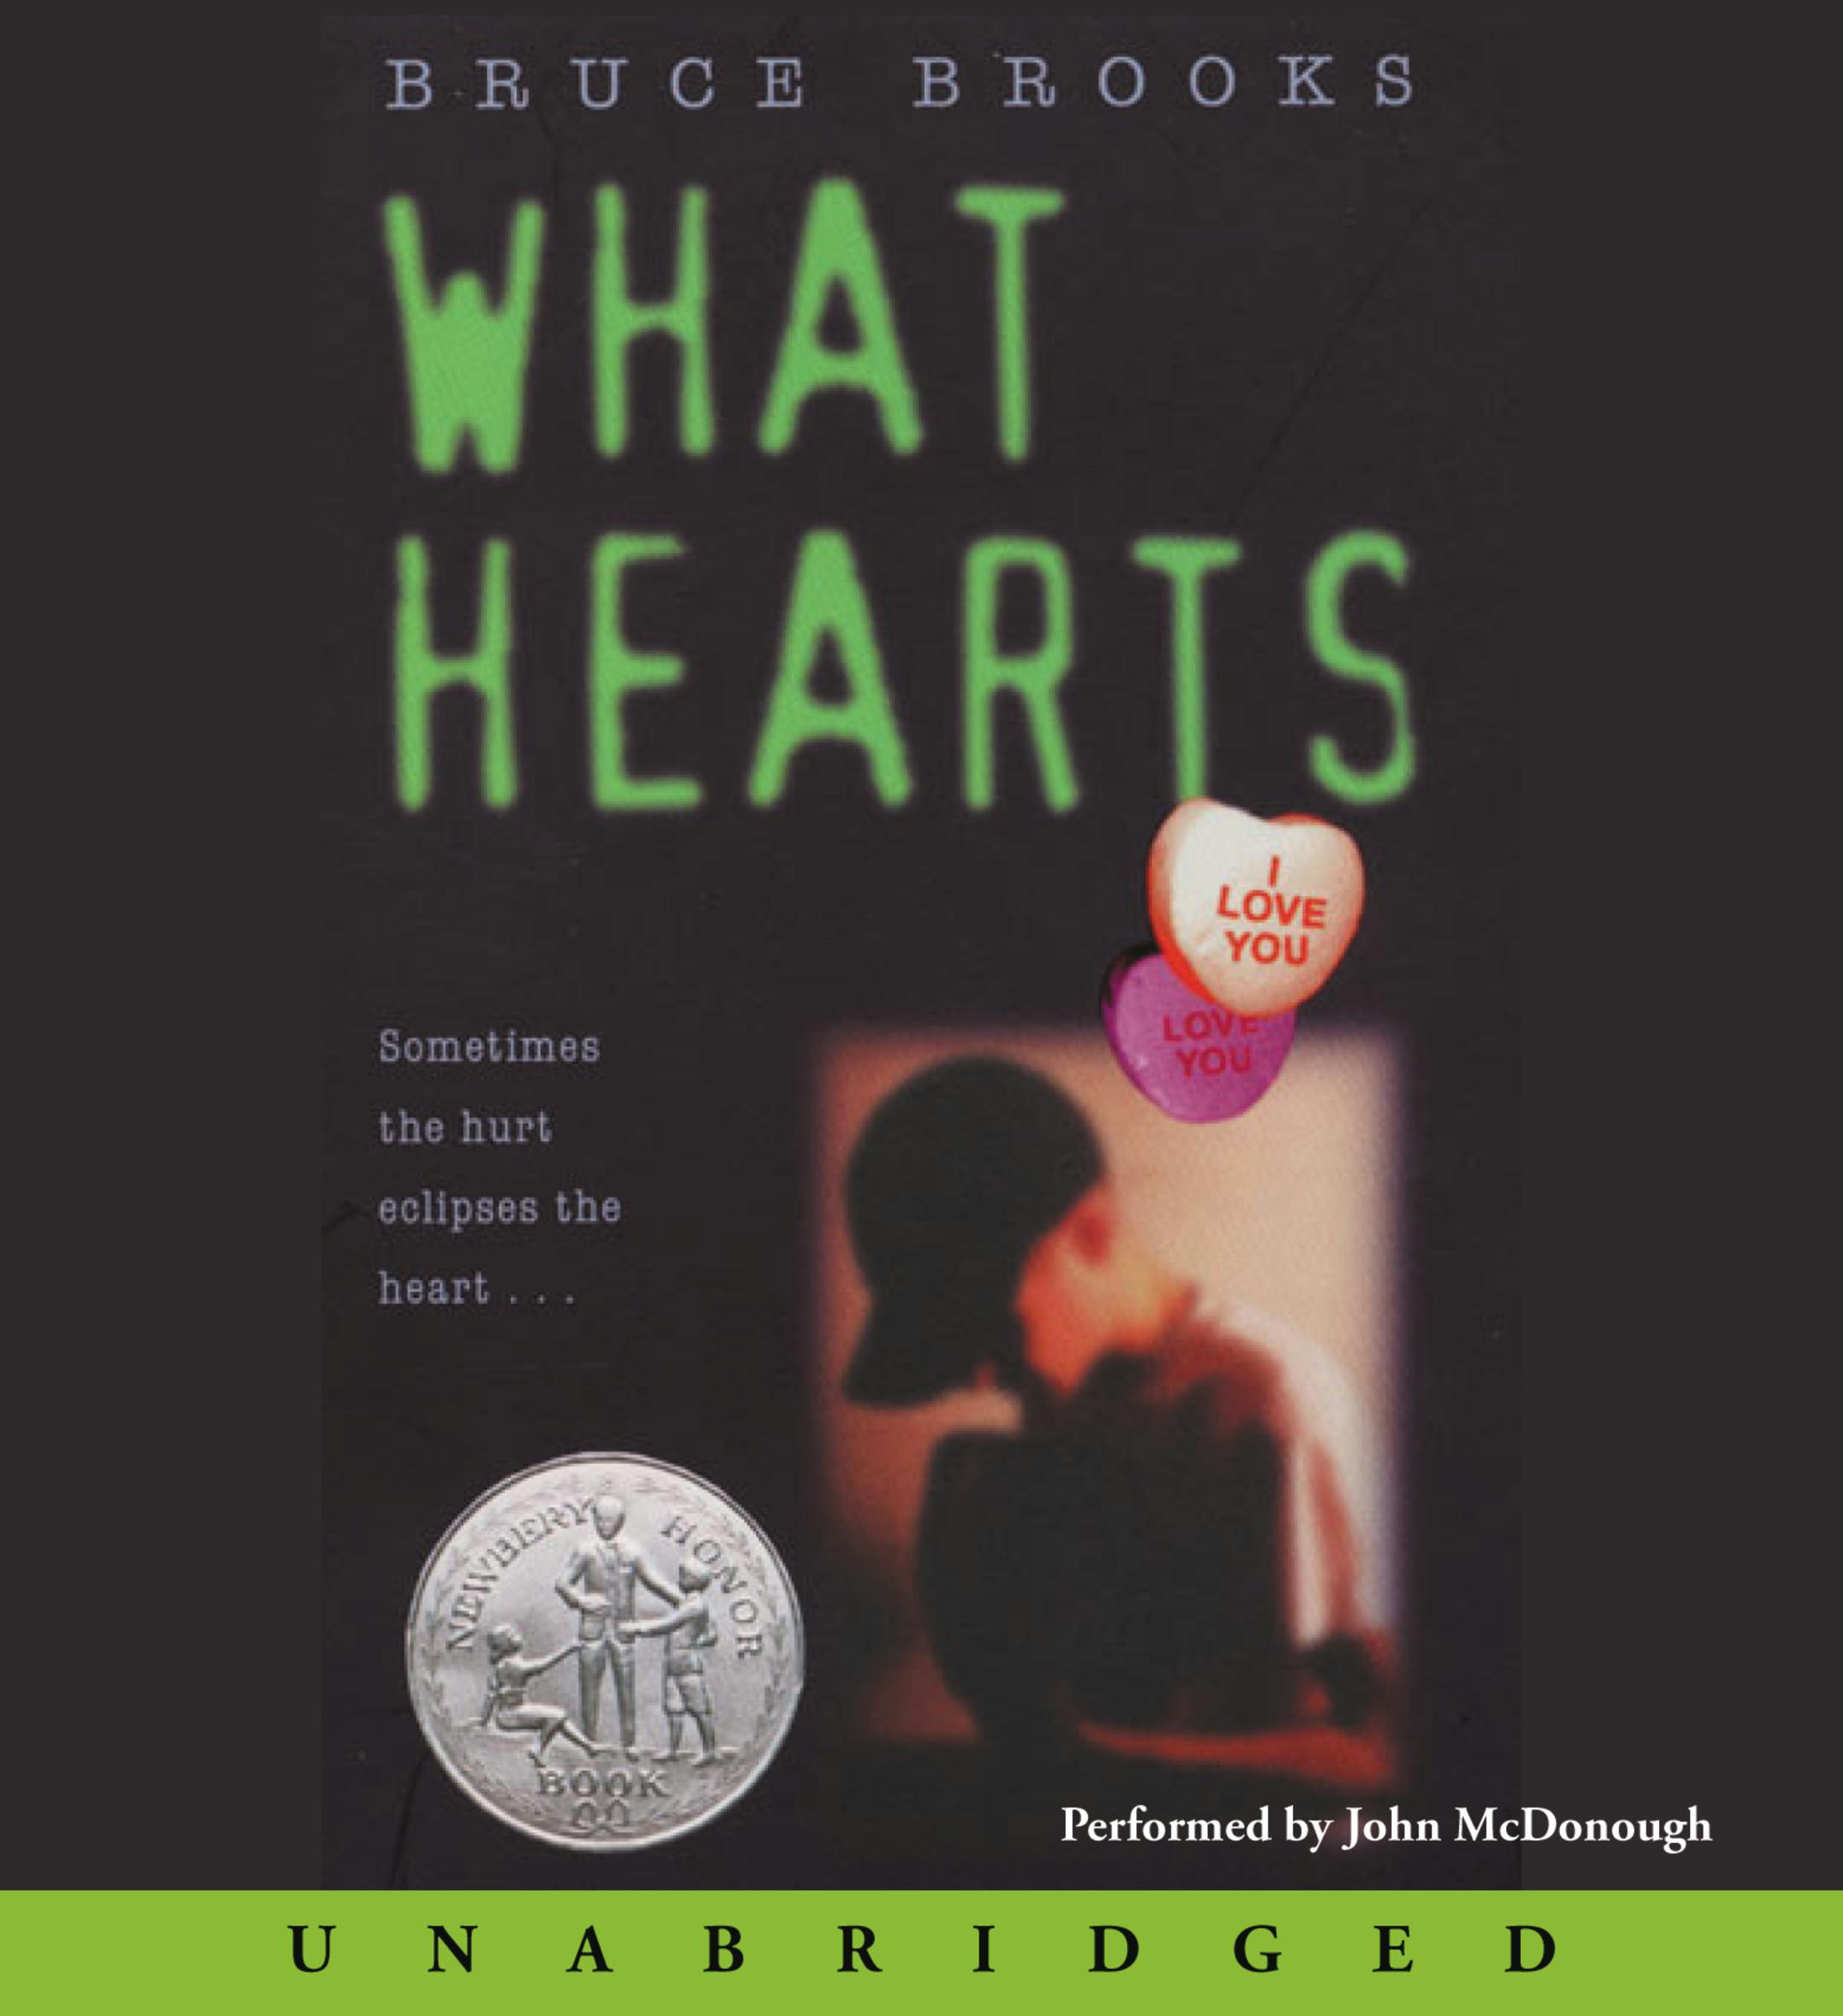 What Hearts - Bruce Brooks